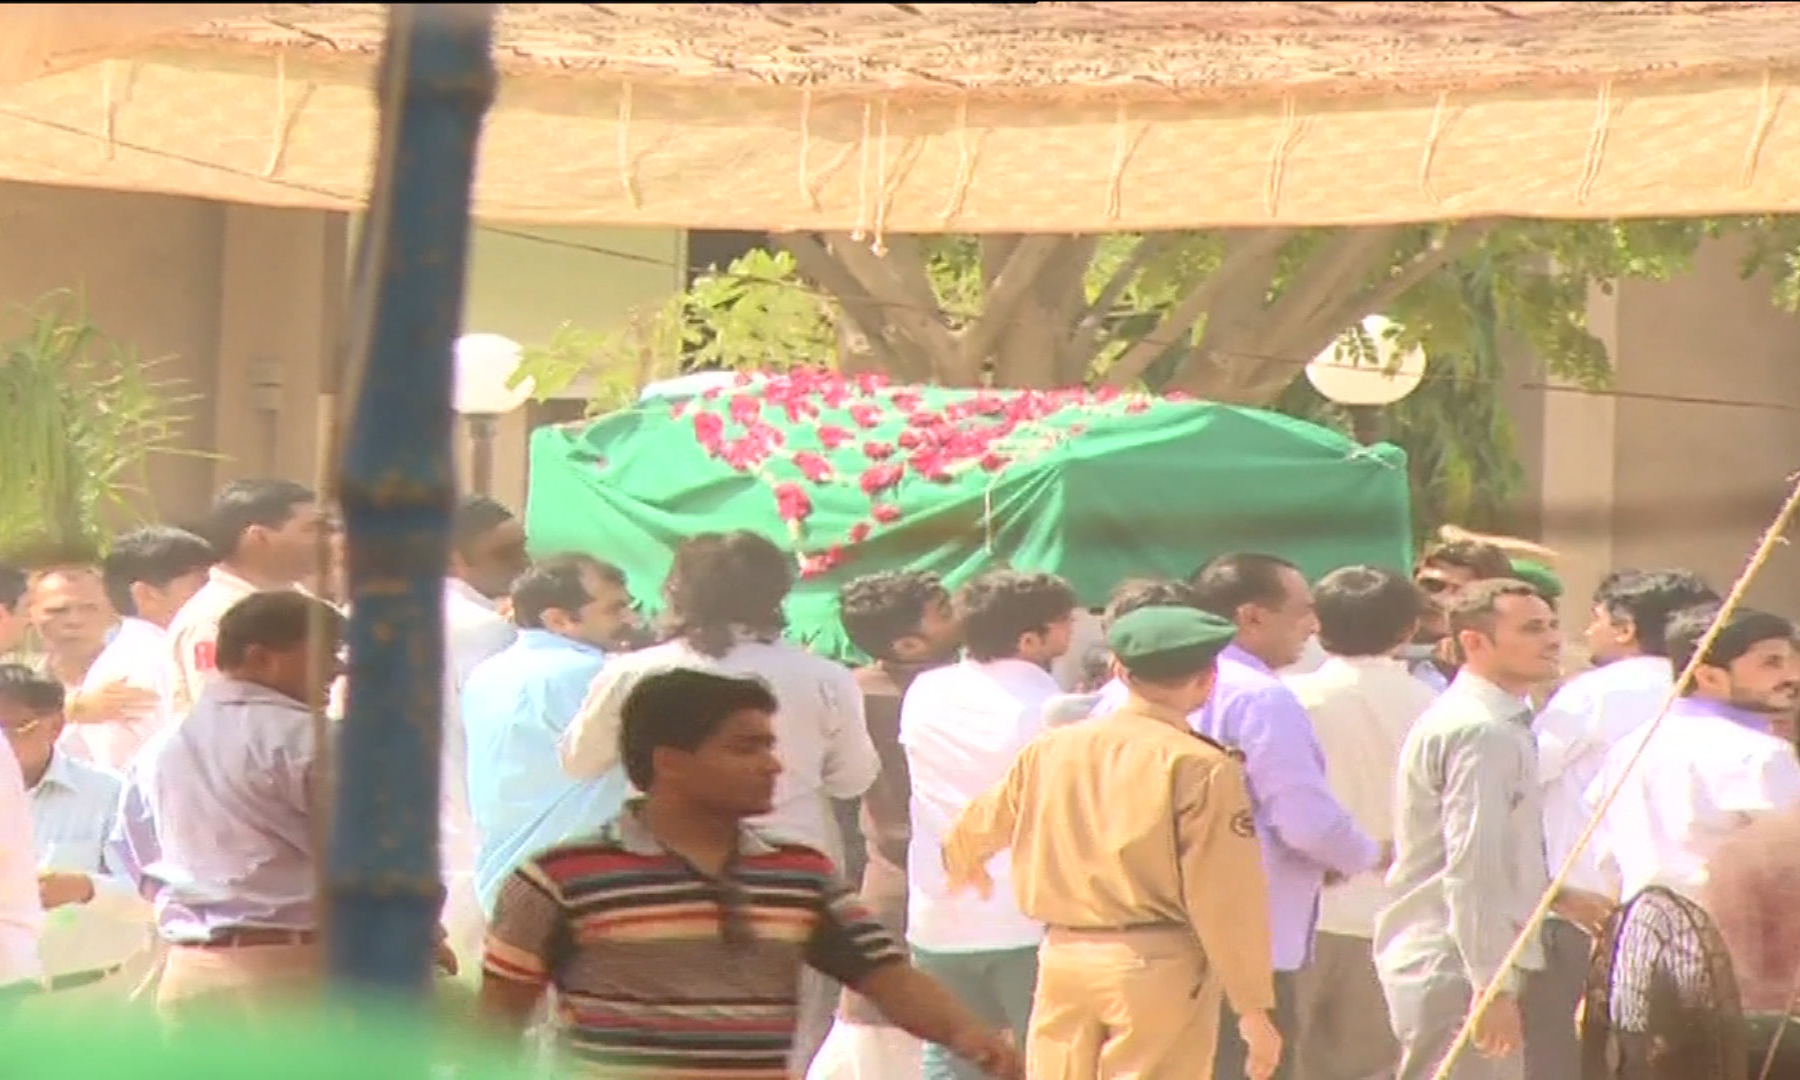 43 victims of Safora tragedy laid to rest in Karachi; mourning day observed across country